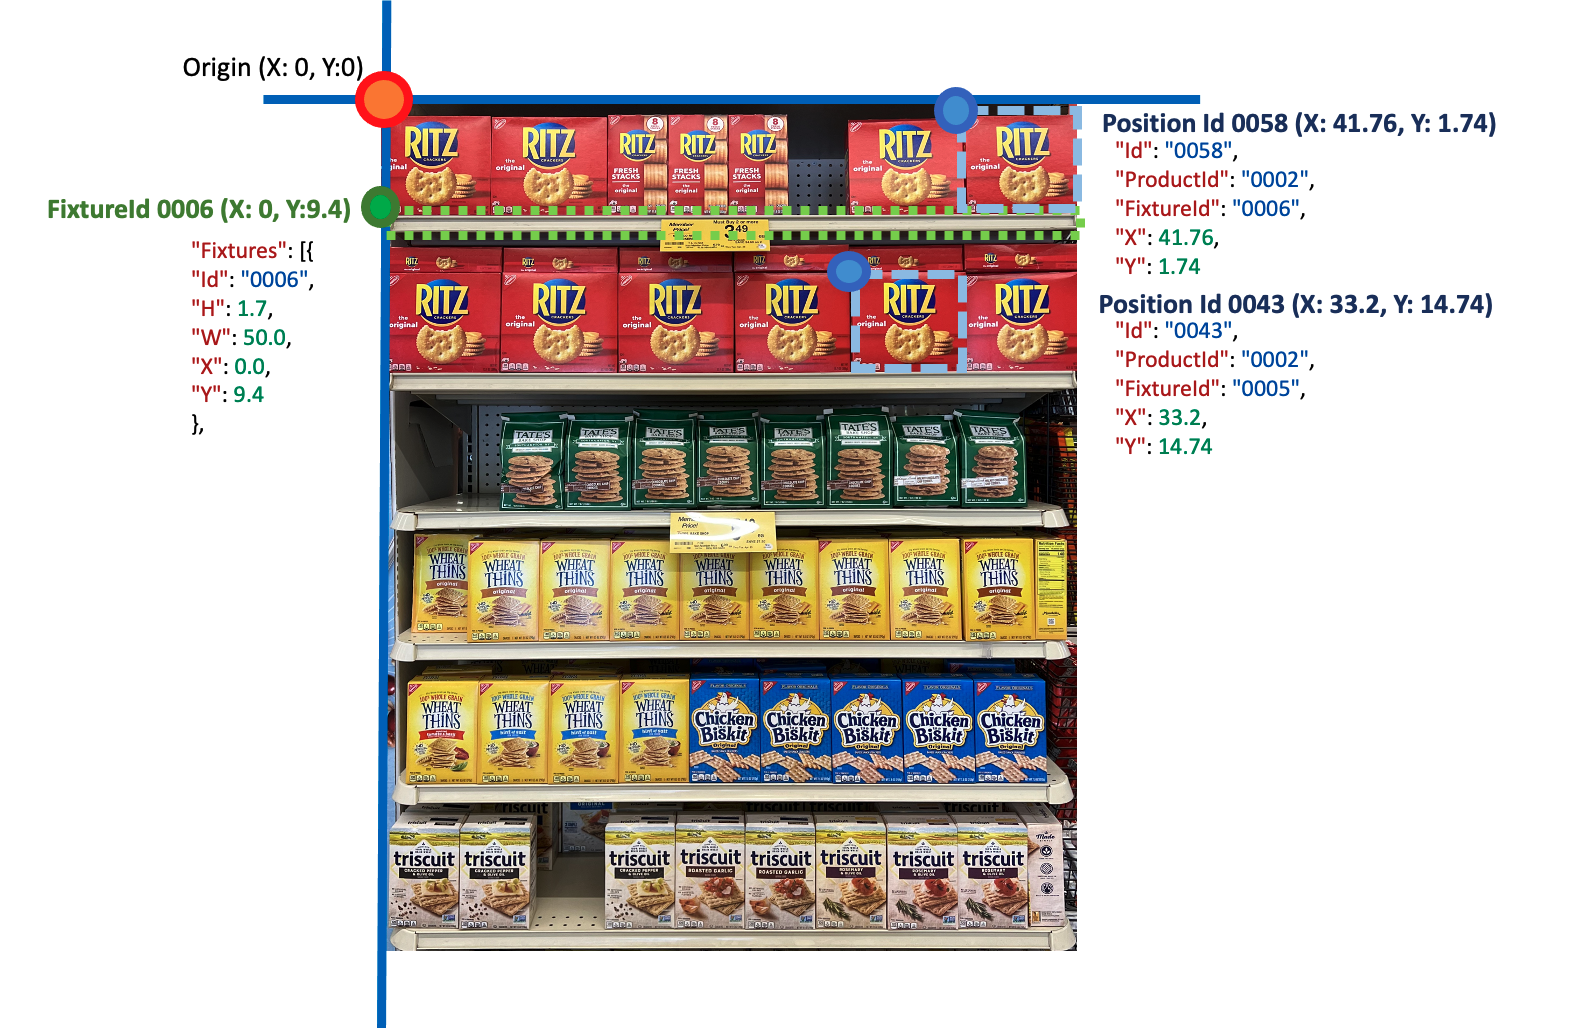 Diagram of a shelf image with fixtures and products highlighted and their coordinates shown.